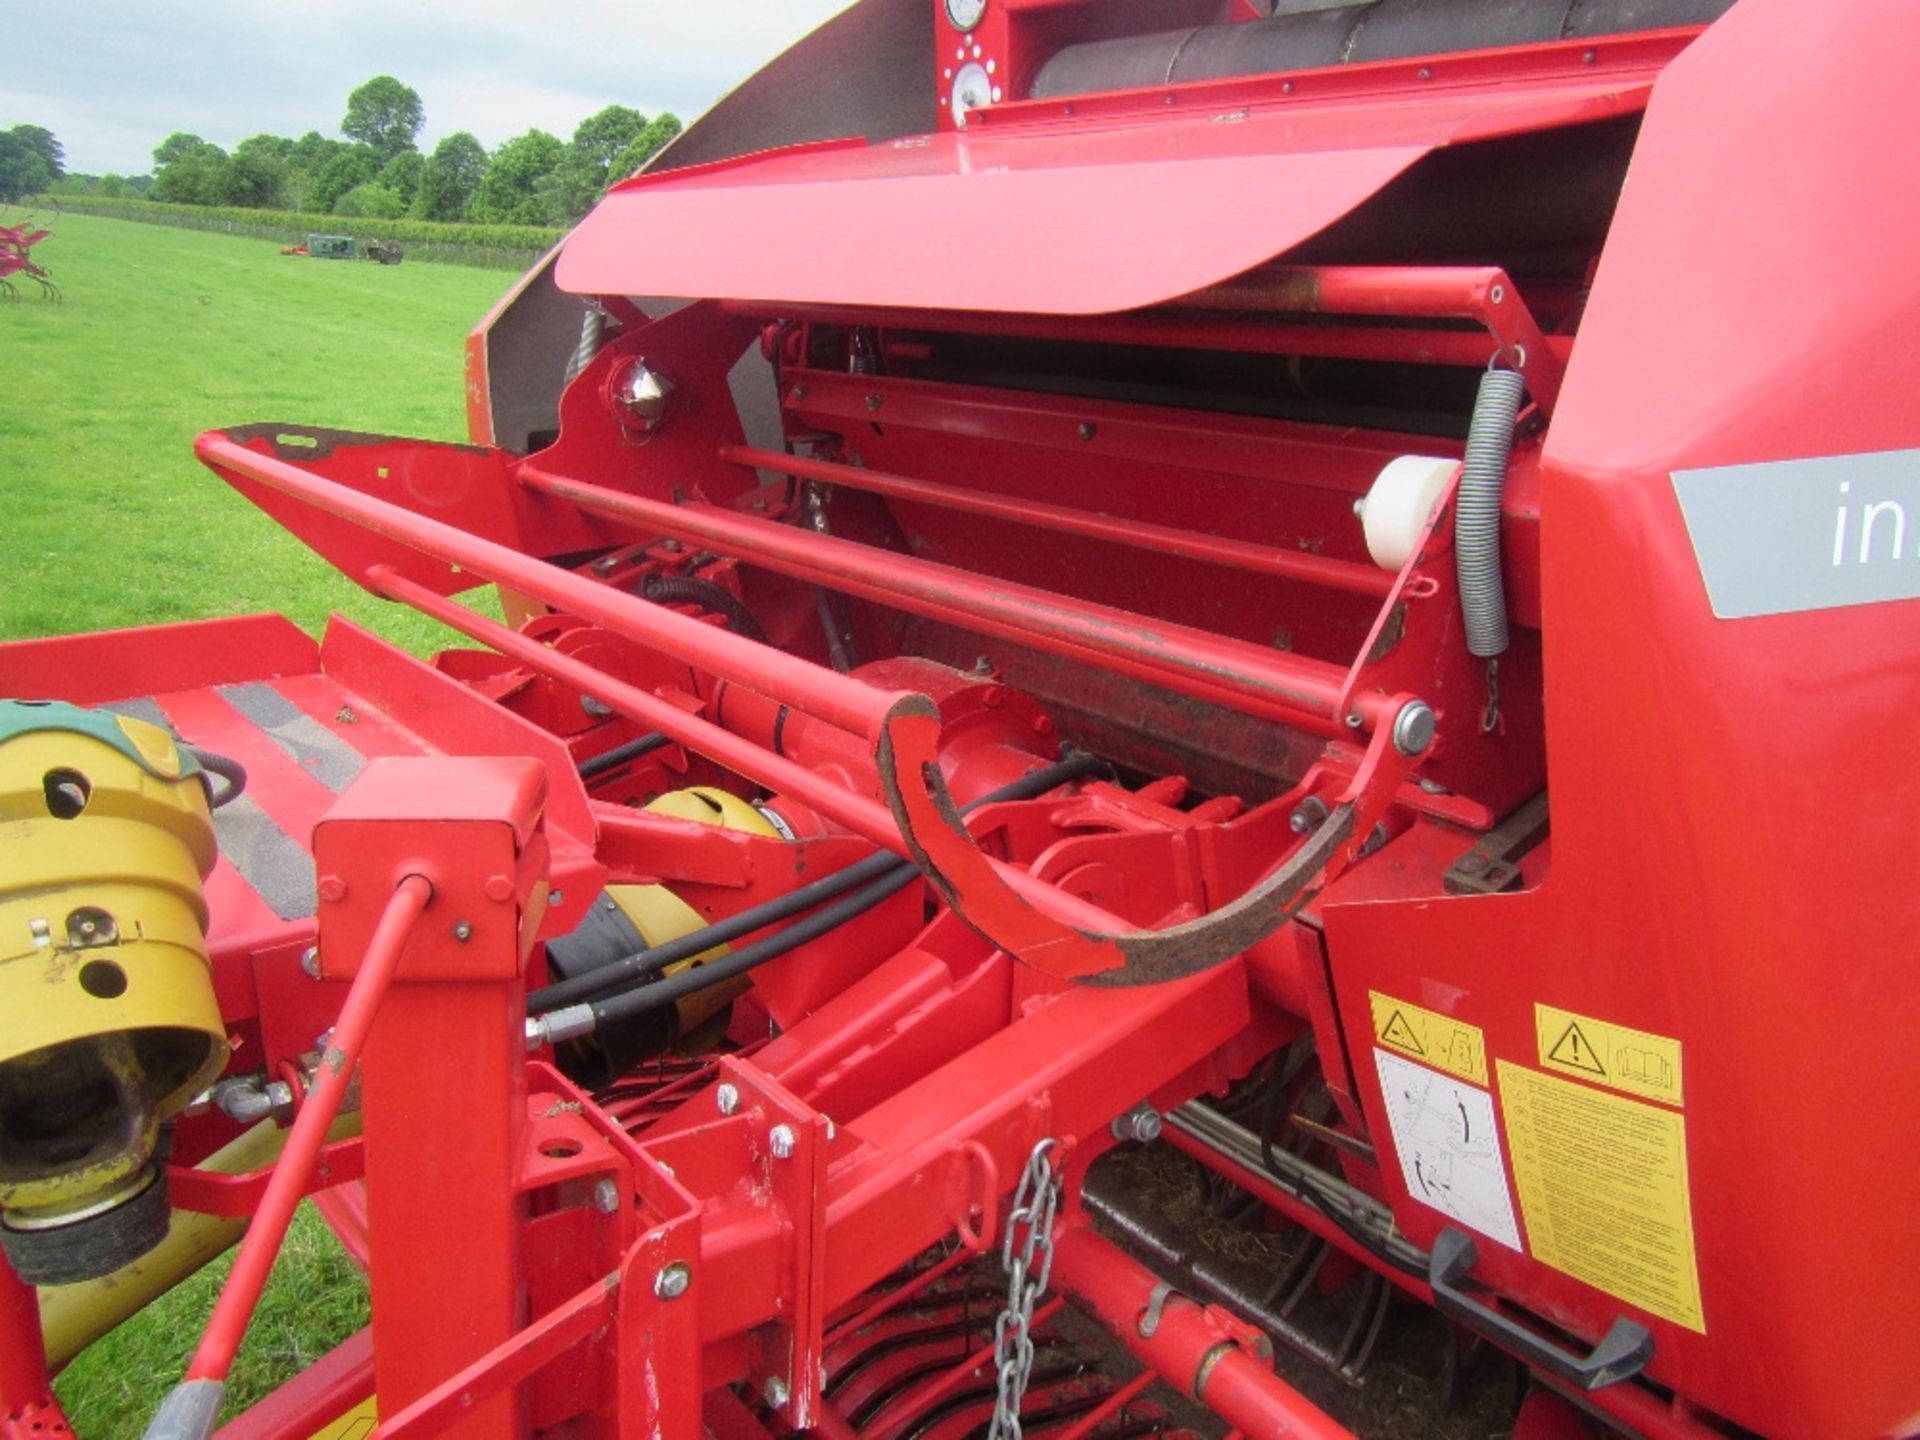 2010 Lely Welger RP435 single axle Master round baler, auto lube, wide pick up, fitted with chopper - Image 6 of 6